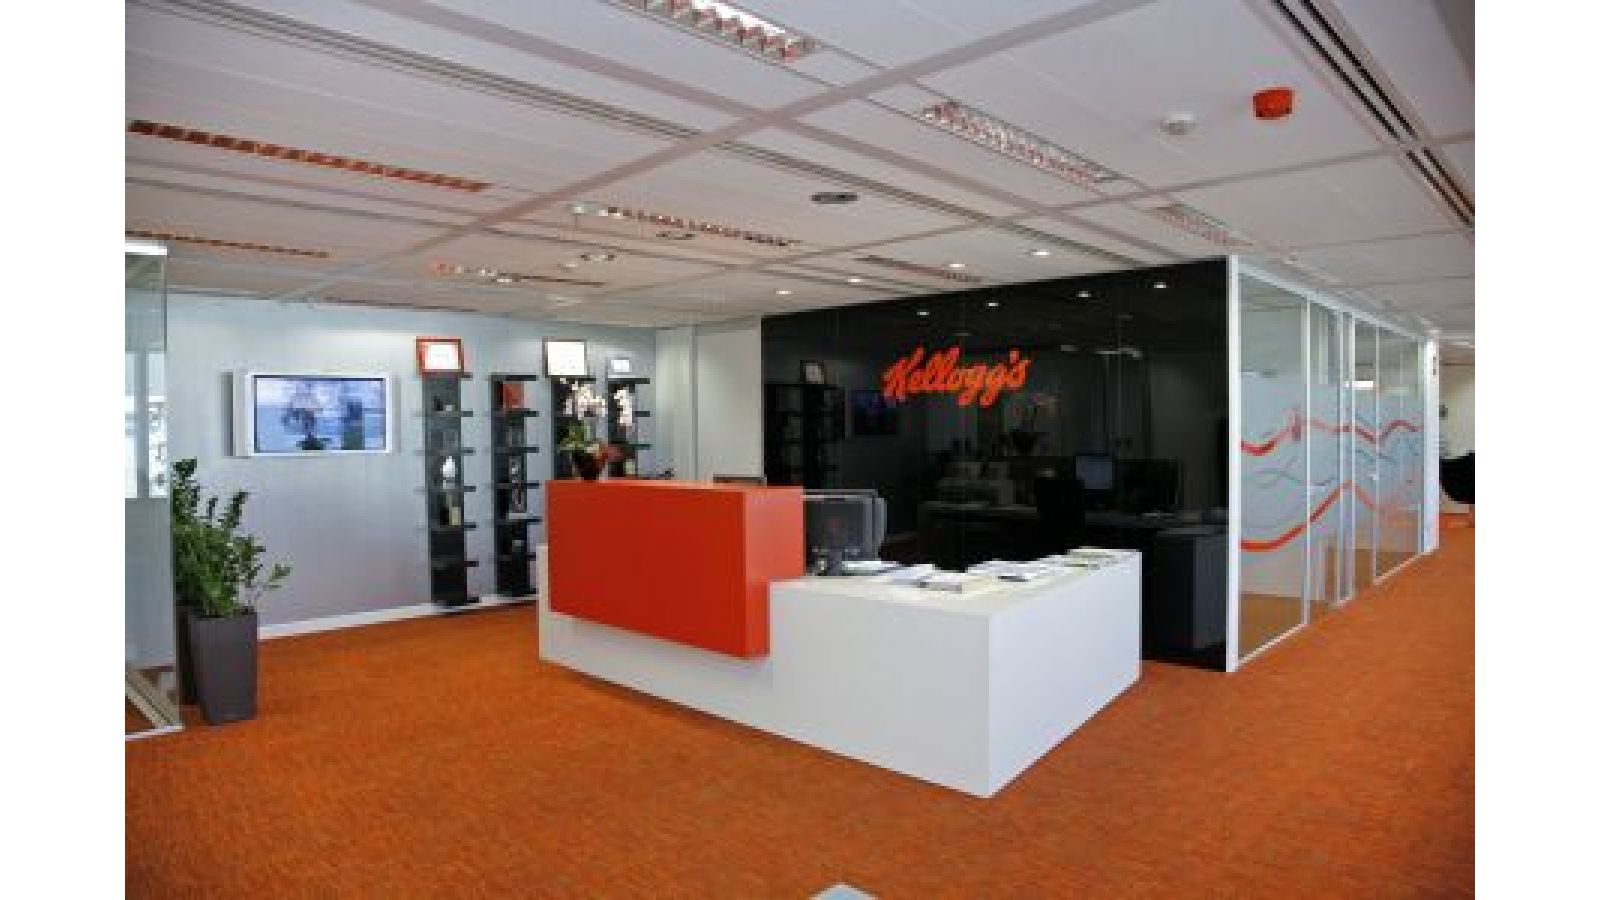 The Kellogg Spain Project seen by 3g office